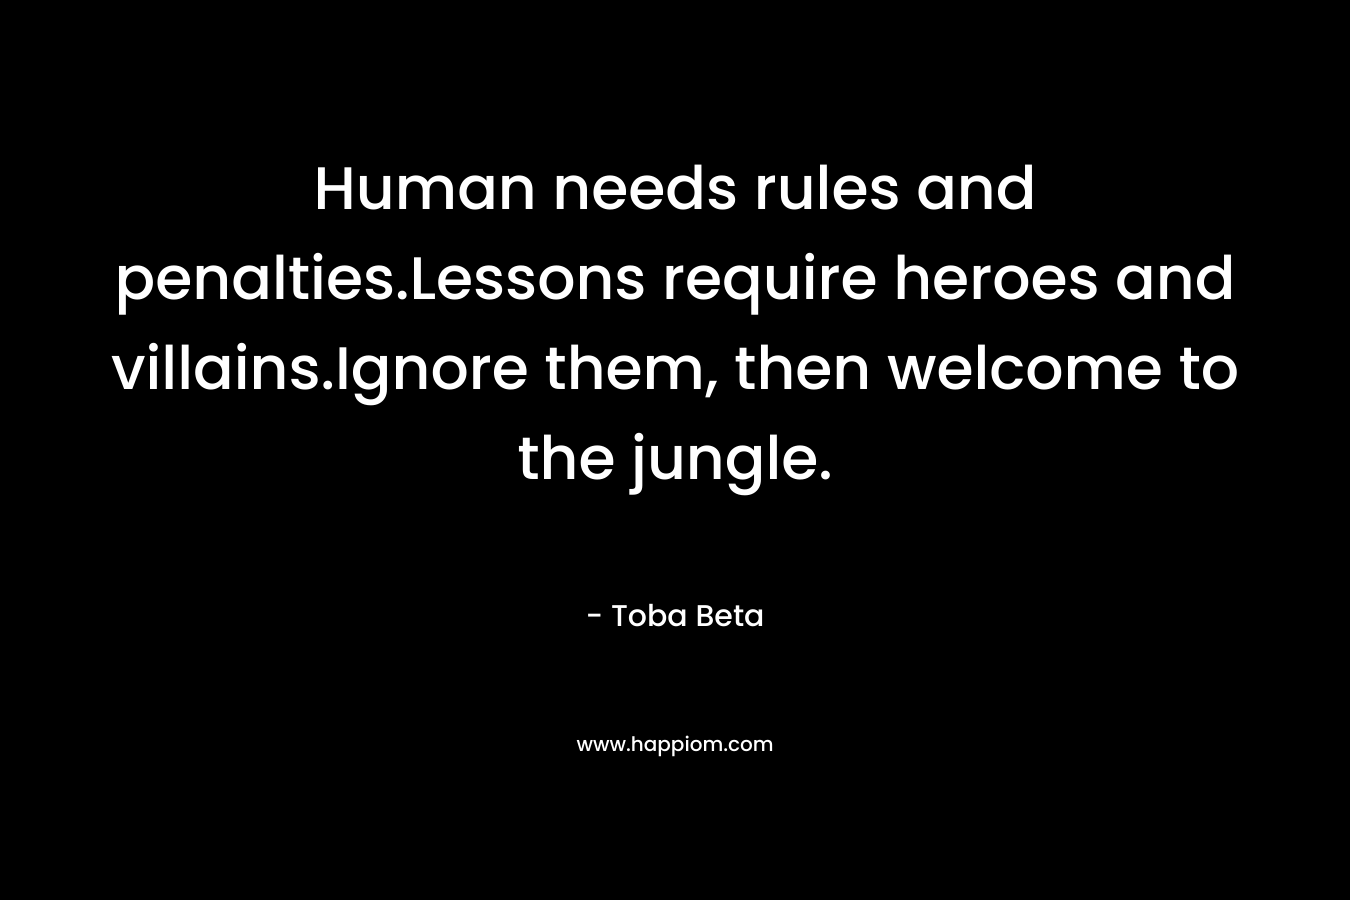 Human needs rules and penalties.Lessons require heroes and villains.Ignore them, then welcome to the jungle. – Toba Beta